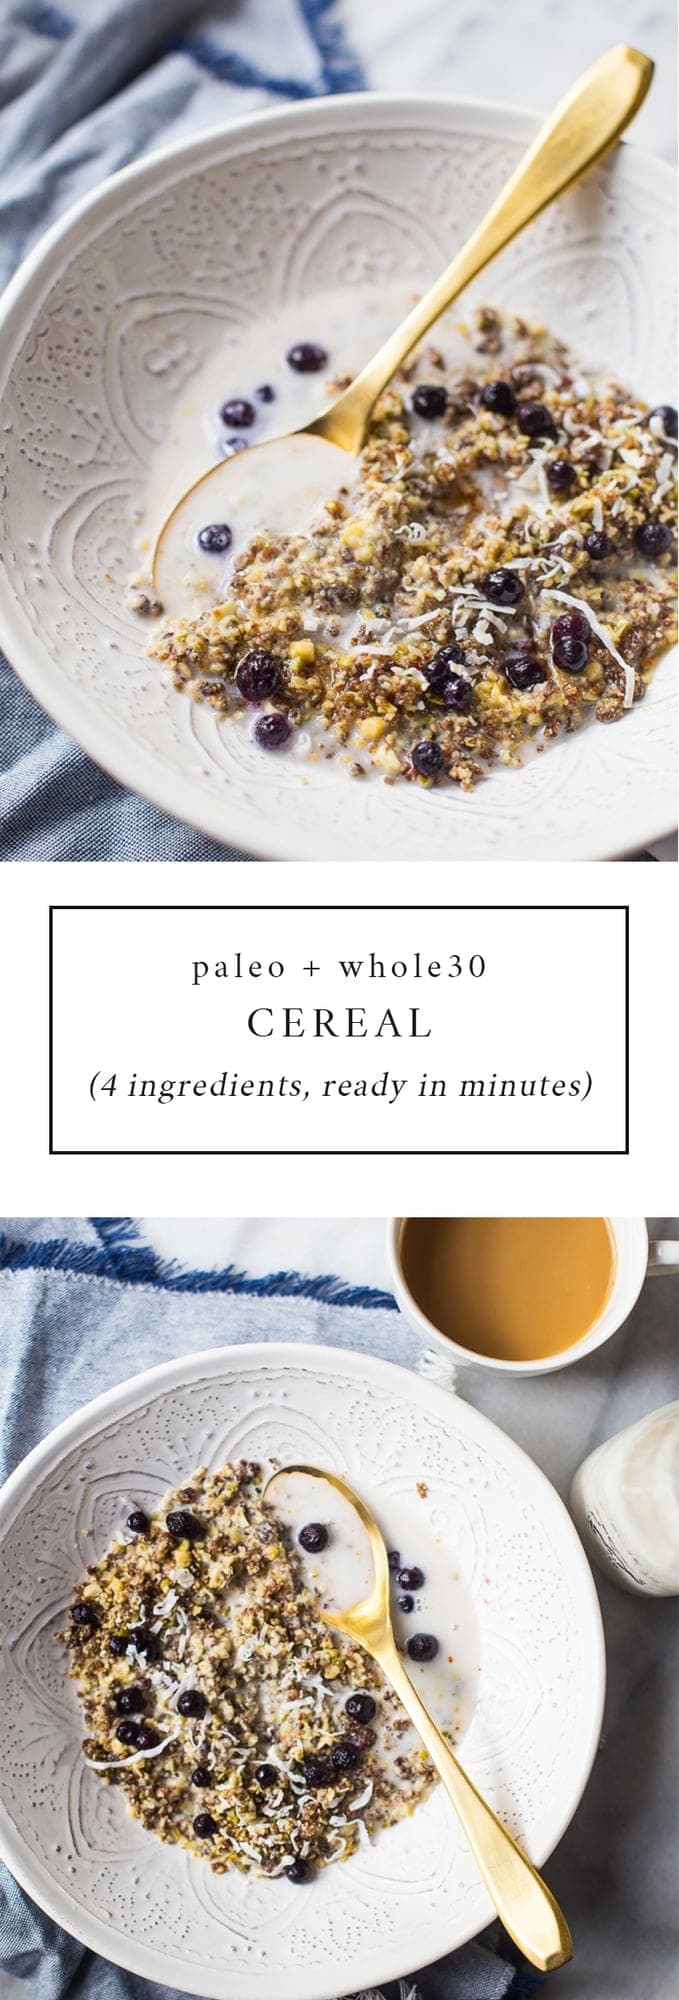 This paleo cereal recipe is quick, easy, and versatile and will transform your mornings. Perfectly crunchy and ready in 2 minutes, you'll love having a batch of this paleo cereal in your pantry at all times! This recipe can be eaten as a Whole30 cereal, too, by simply omitting maple syrup during serving.